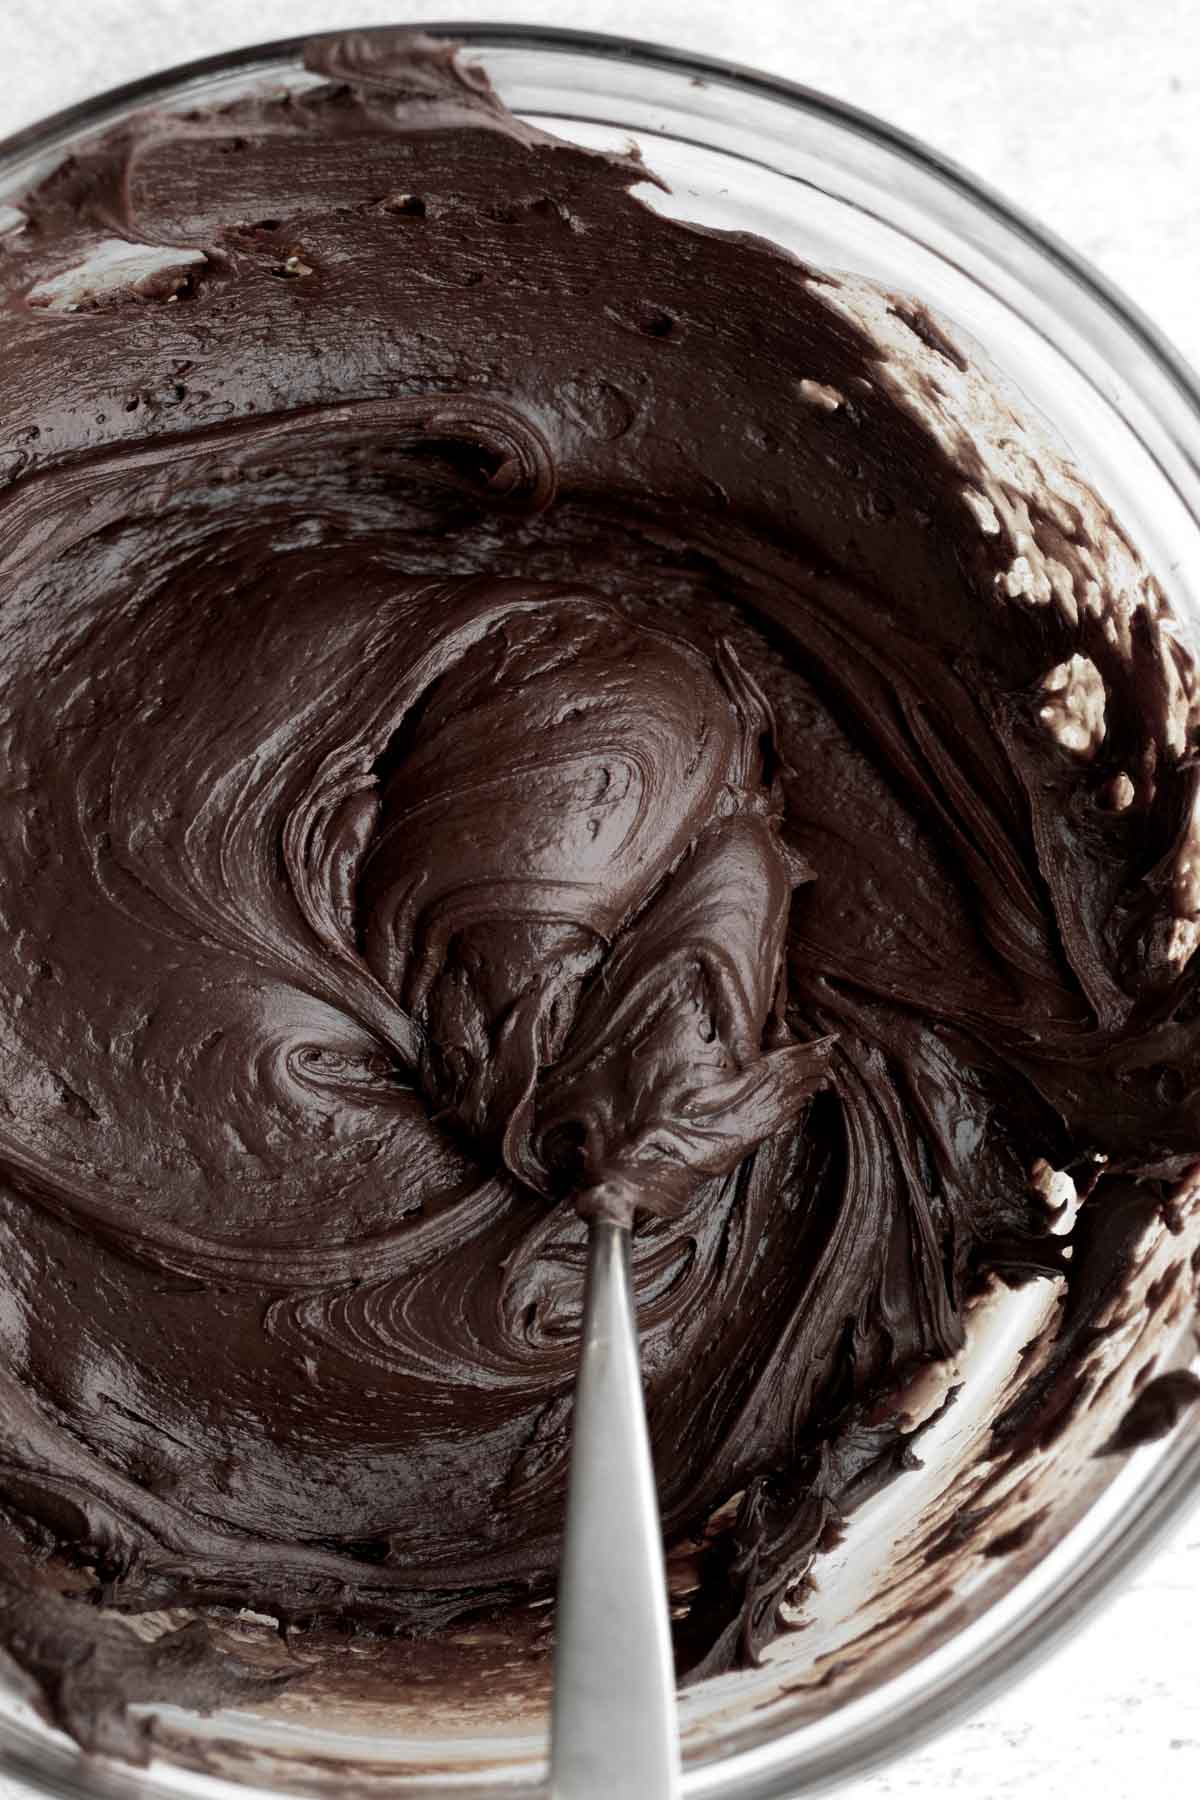 Creamy chocolate fudge with a spoon.